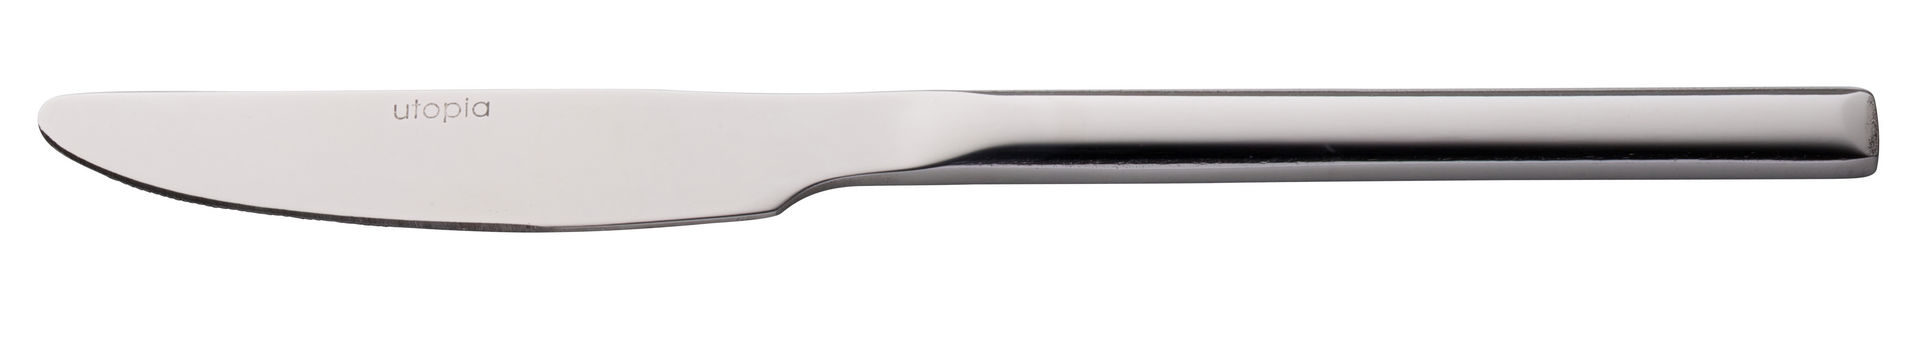 Signature Table Knife - F10302-000000-B12240 (Pack of 240)